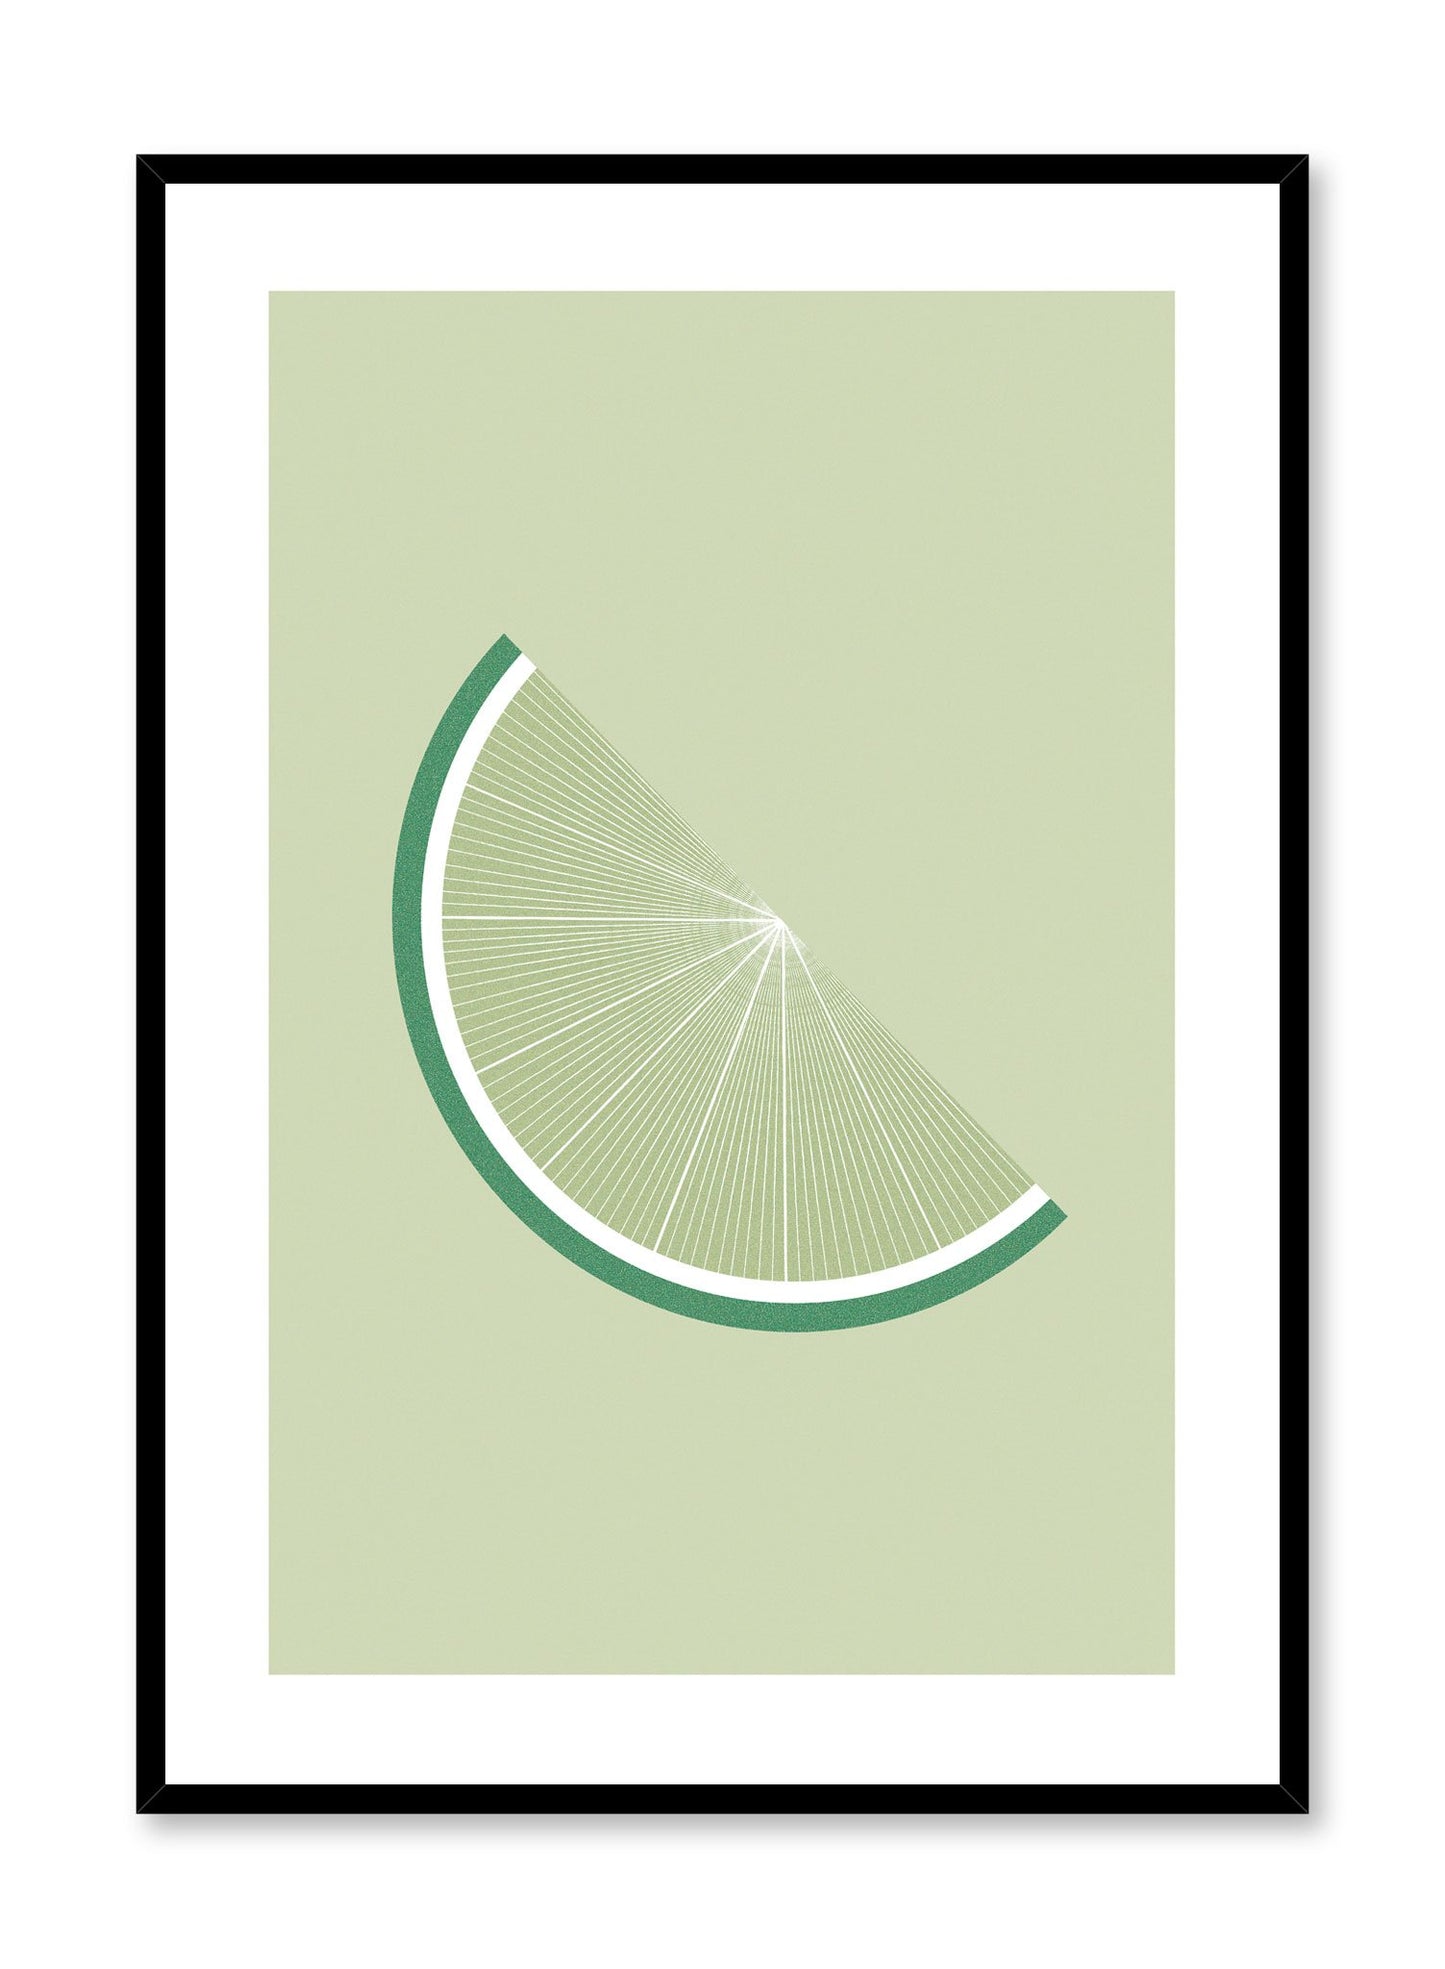 Minimalist poster by Opposite Wall with lime graphic illustration